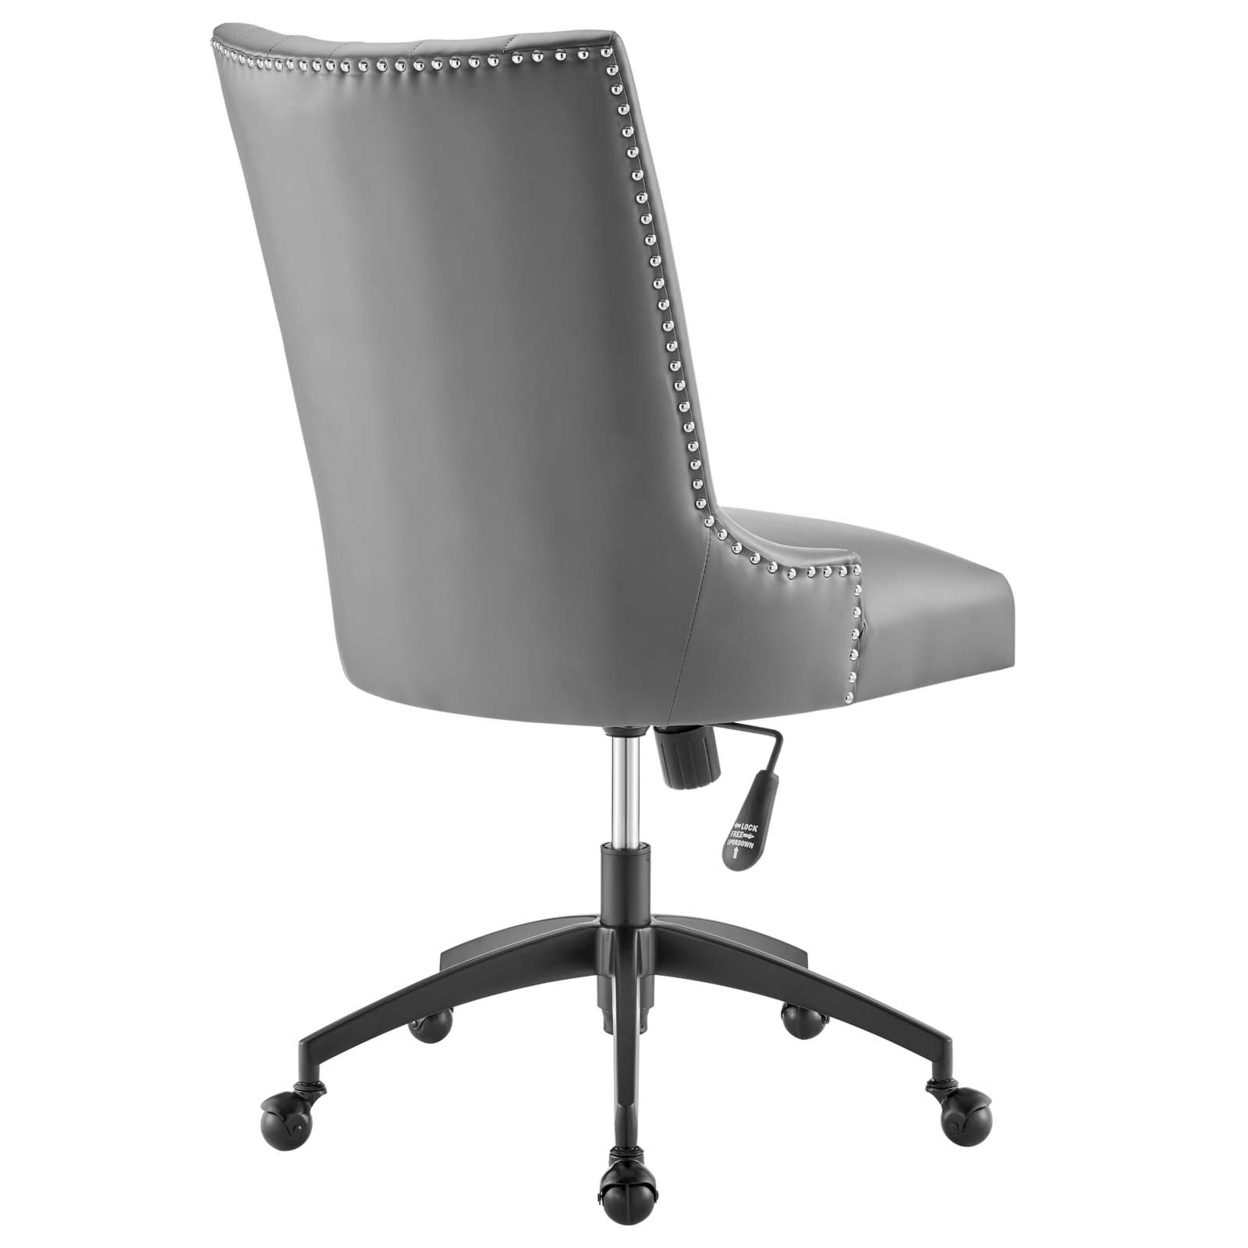 Empower Channel Tufted Vegan Leather Office Chair, Black Gray